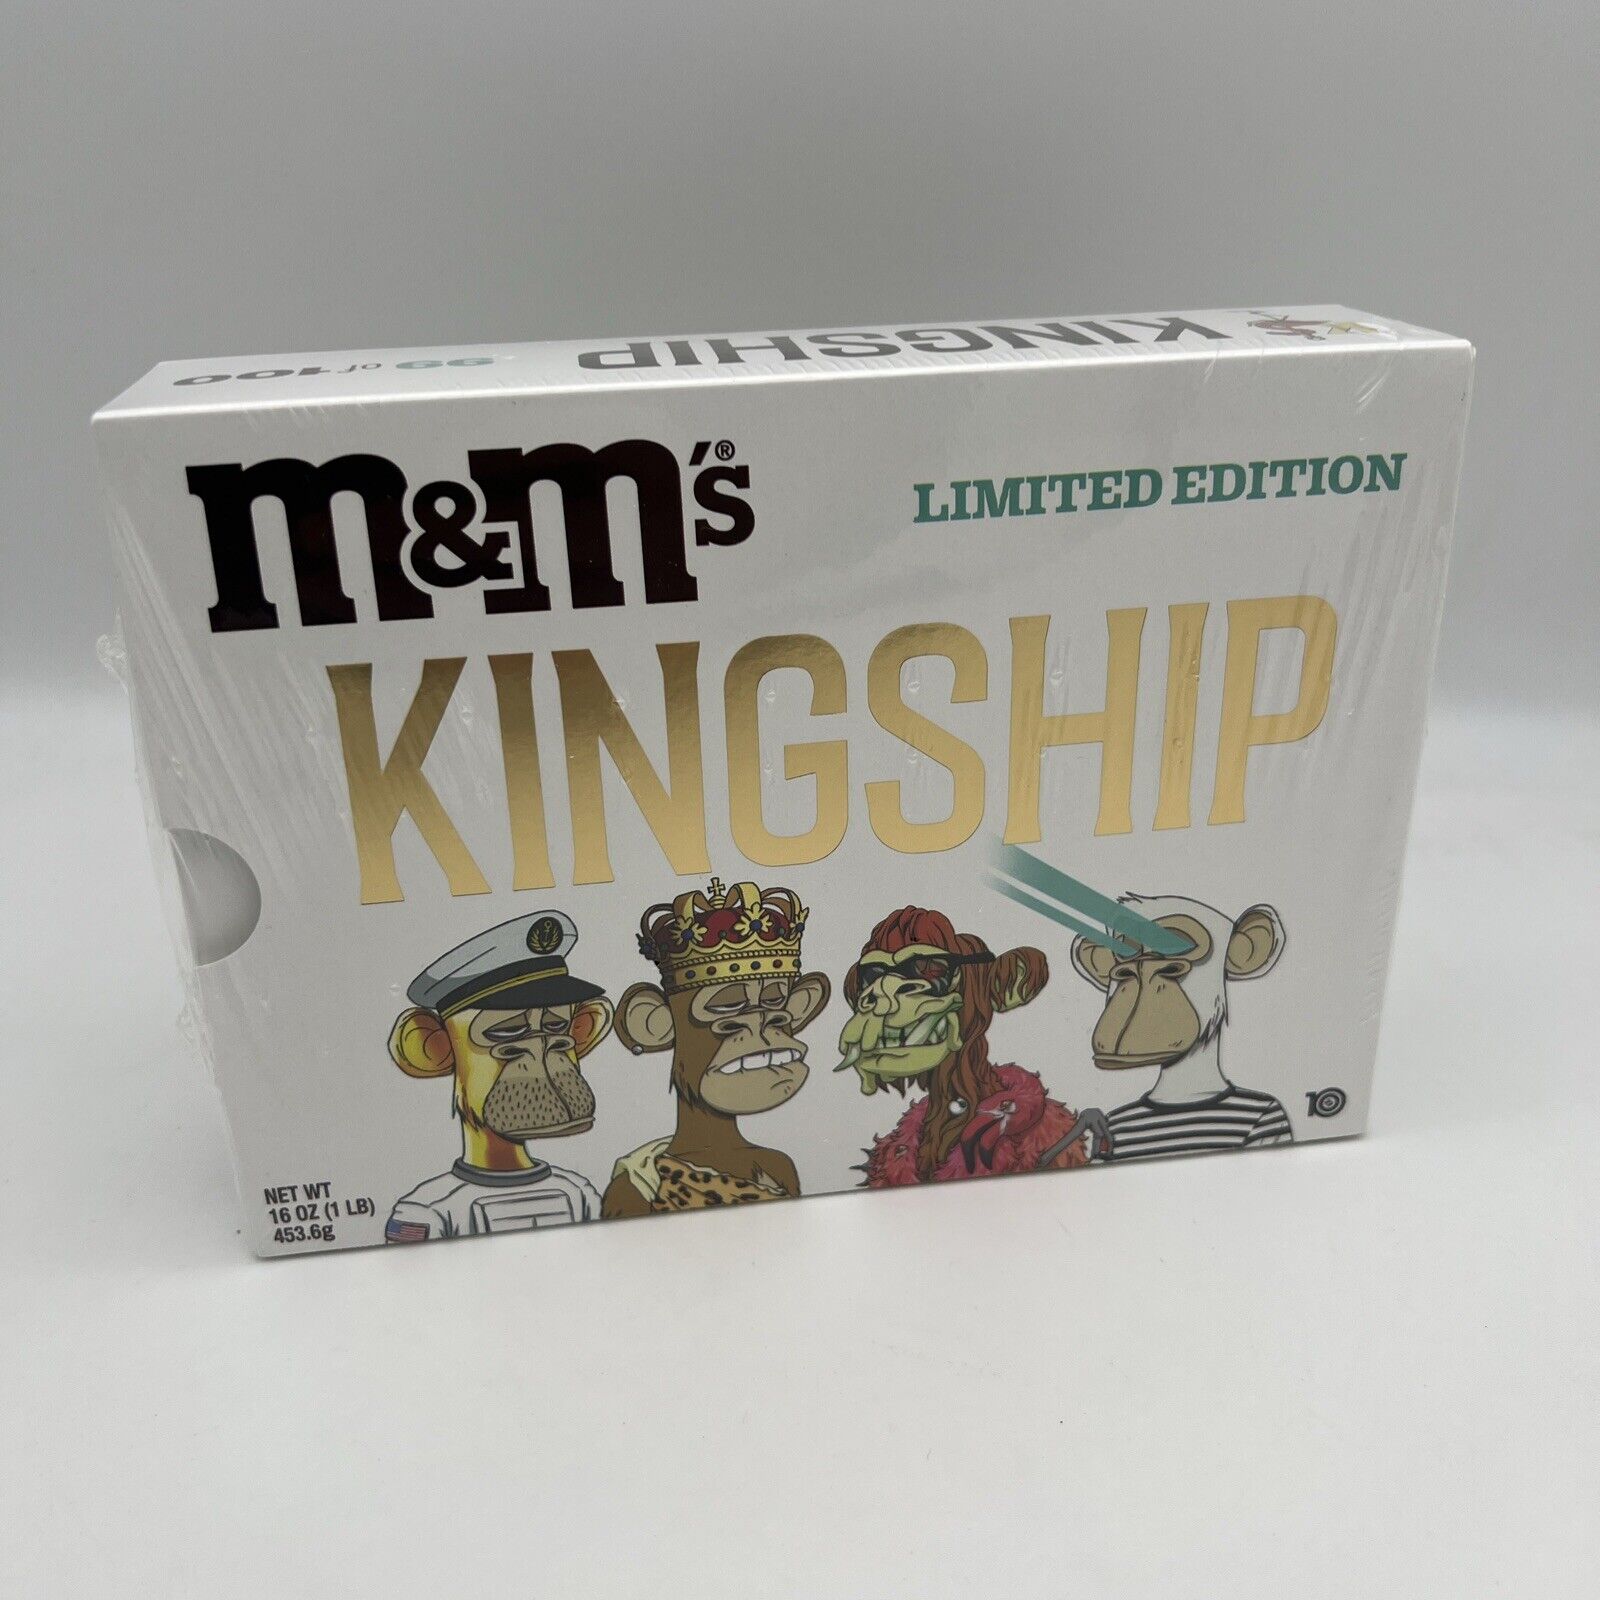 KINGSHIP LIMITED EDITION M&M’S® GOLD GIFT BOX￼Bored Ape Yacht Club NEW #99/100